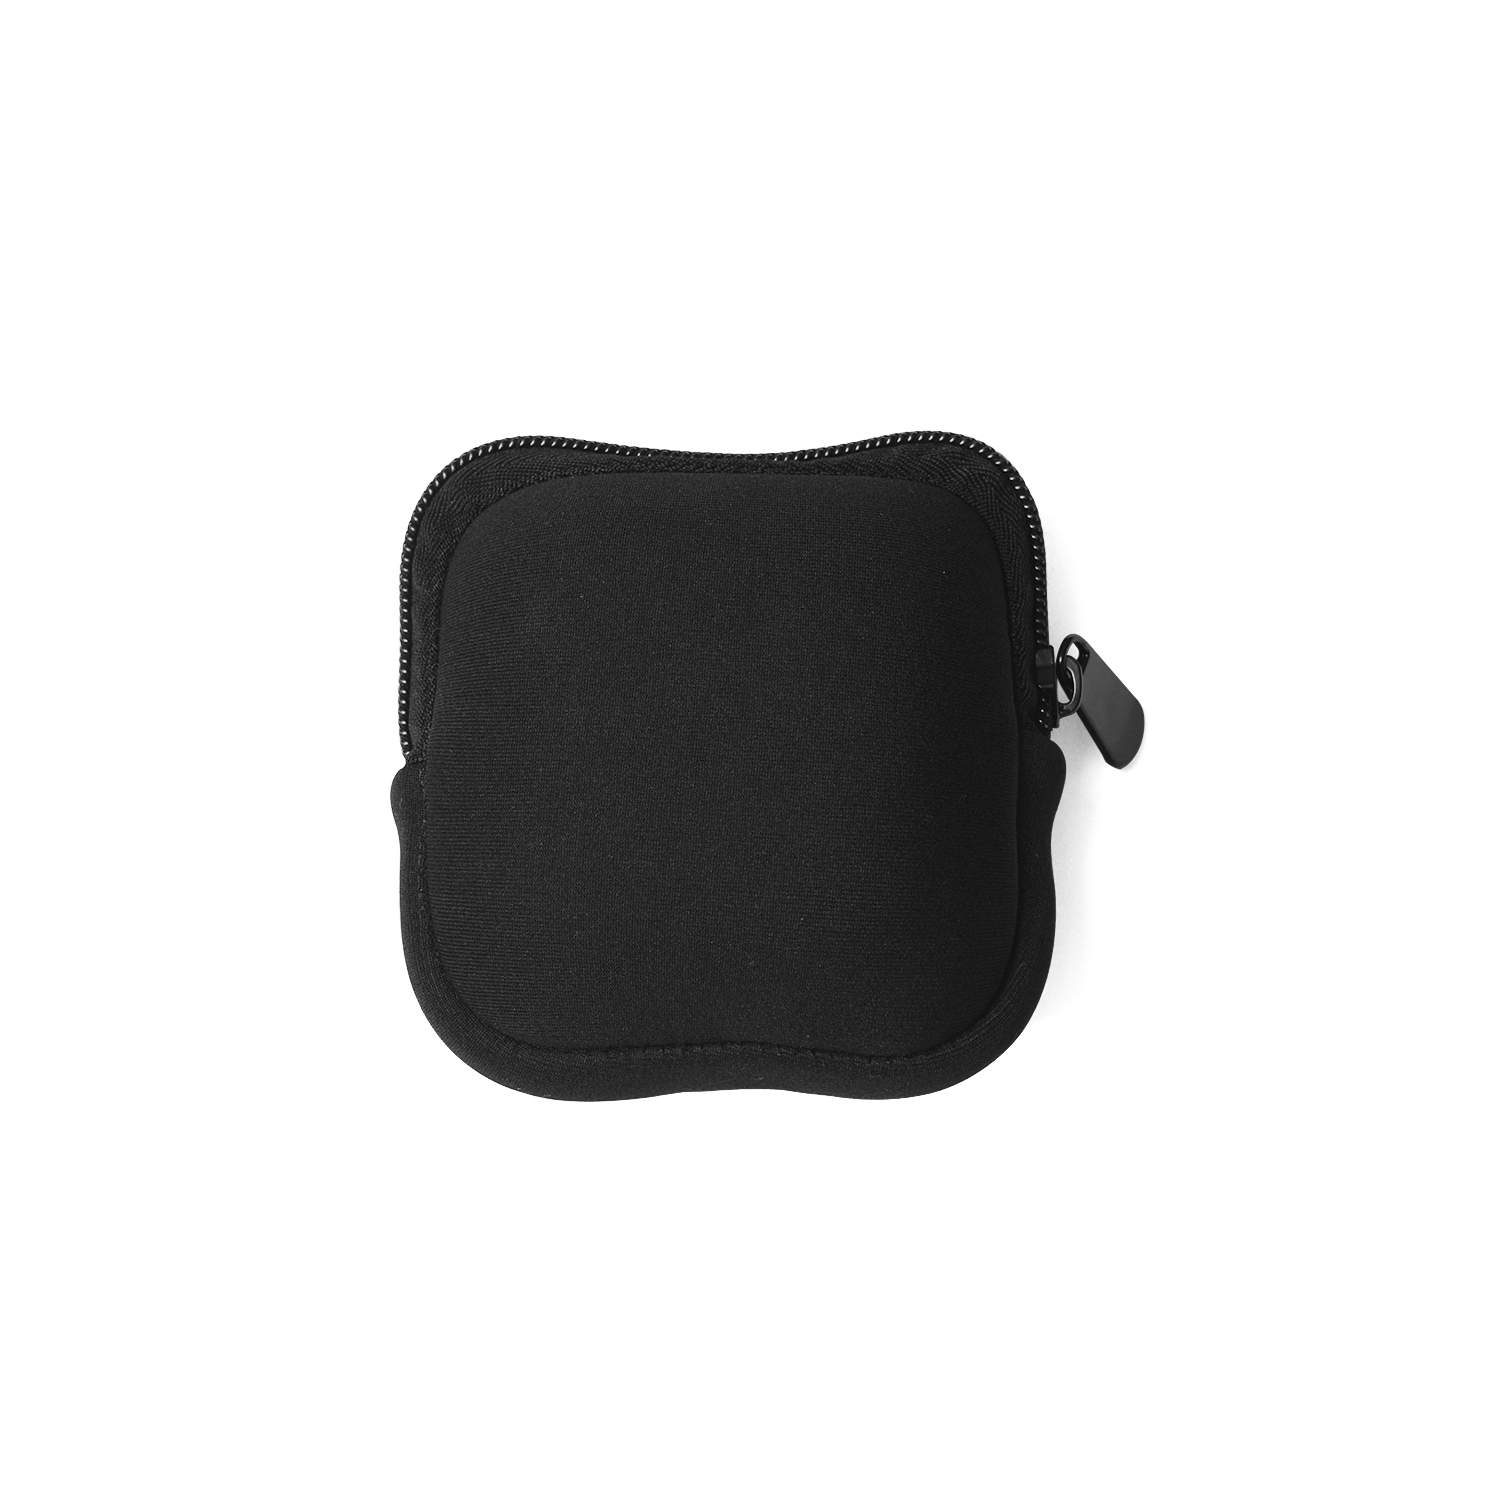 Bakeey-Earphone-Storage-Bag-Wireless-bluetooth-Headset-Protective-Carrying-Case-Dustproof-Portable-S-1800555-5